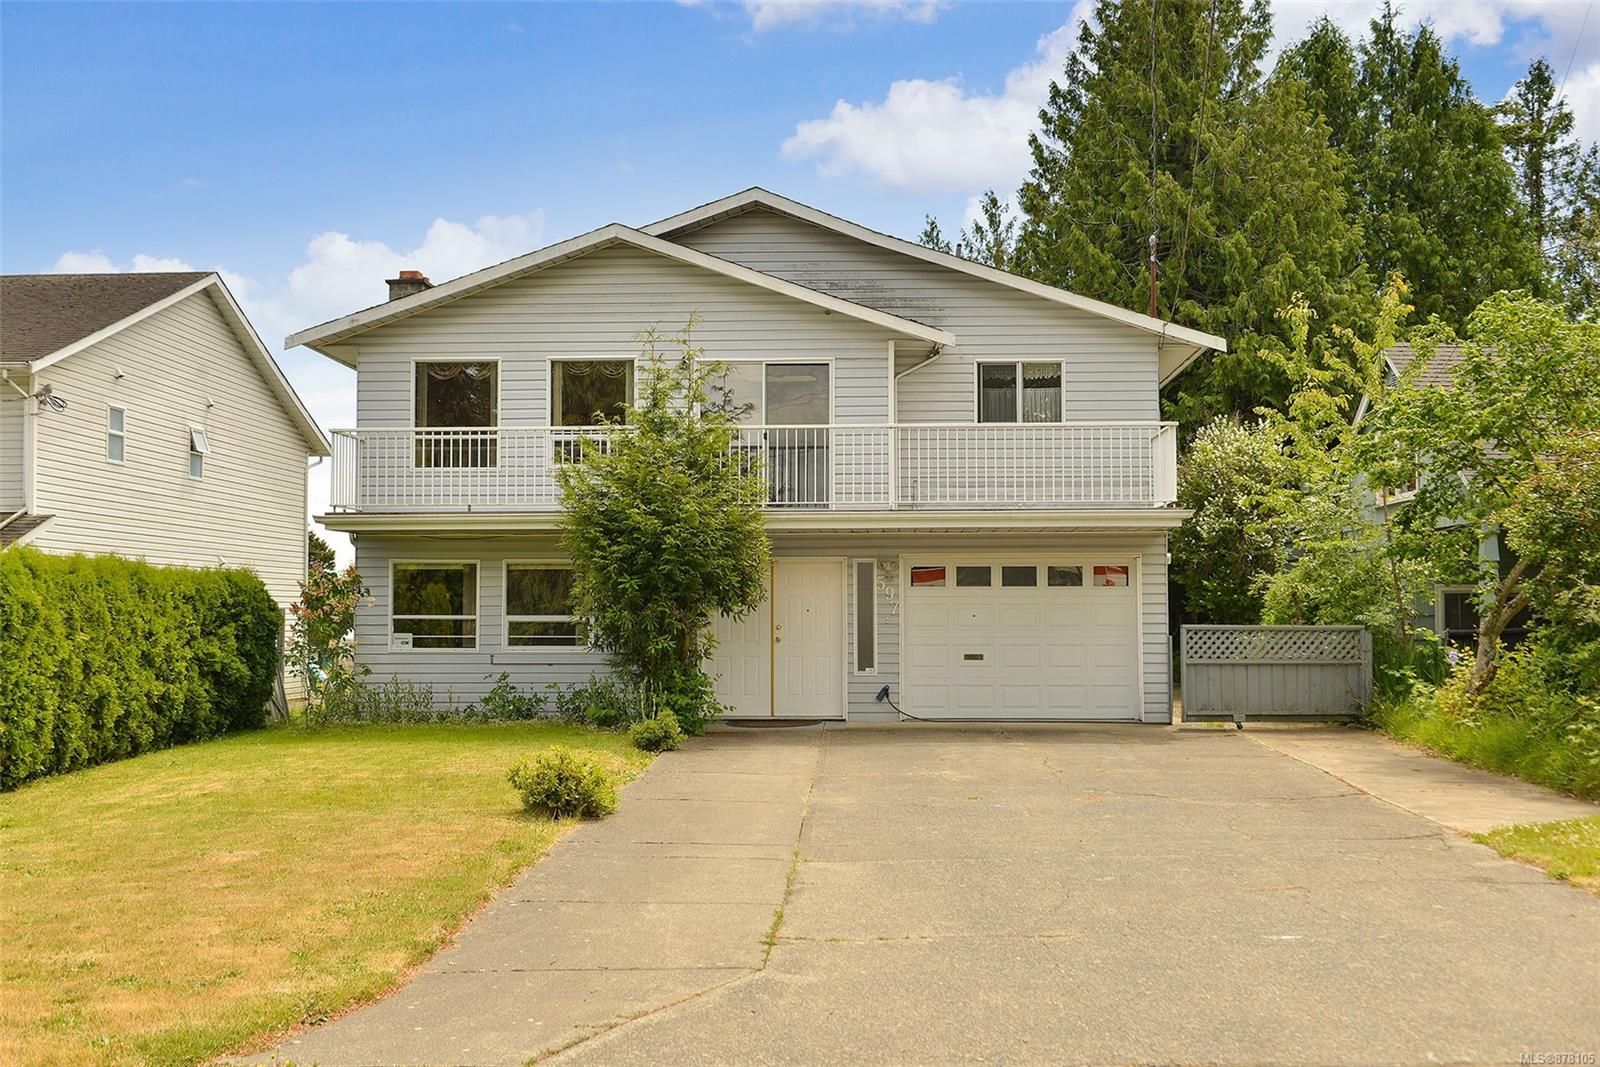 Main Photo: 597 LEASIDE Ave in Saanich: SW Glanford House for sale (Saanich West)  : MLS®# 878105